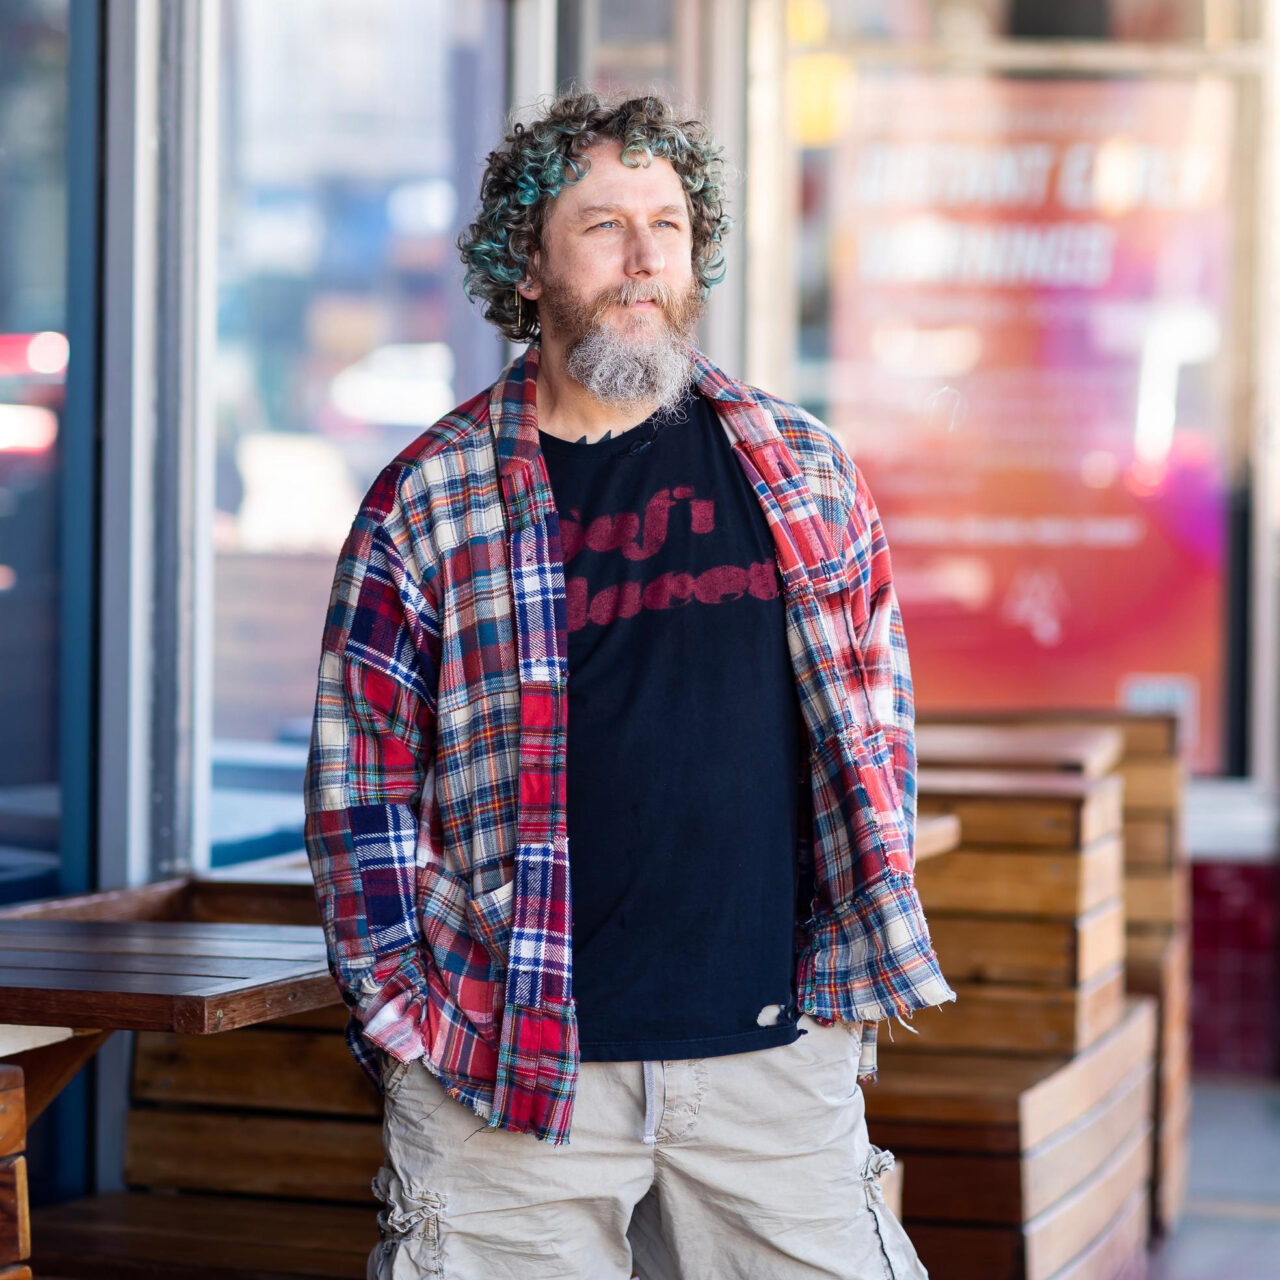 A middle-aged man squints from the sun. He has pink skin, light-brown, mid-length curly hair with blue tips, and a long curly beard with a greying goatee. He’s wearing a black t-shirt printed with red text, a patchwork red flannel shirt, and khaki pants. Behind him is outdoor seating.